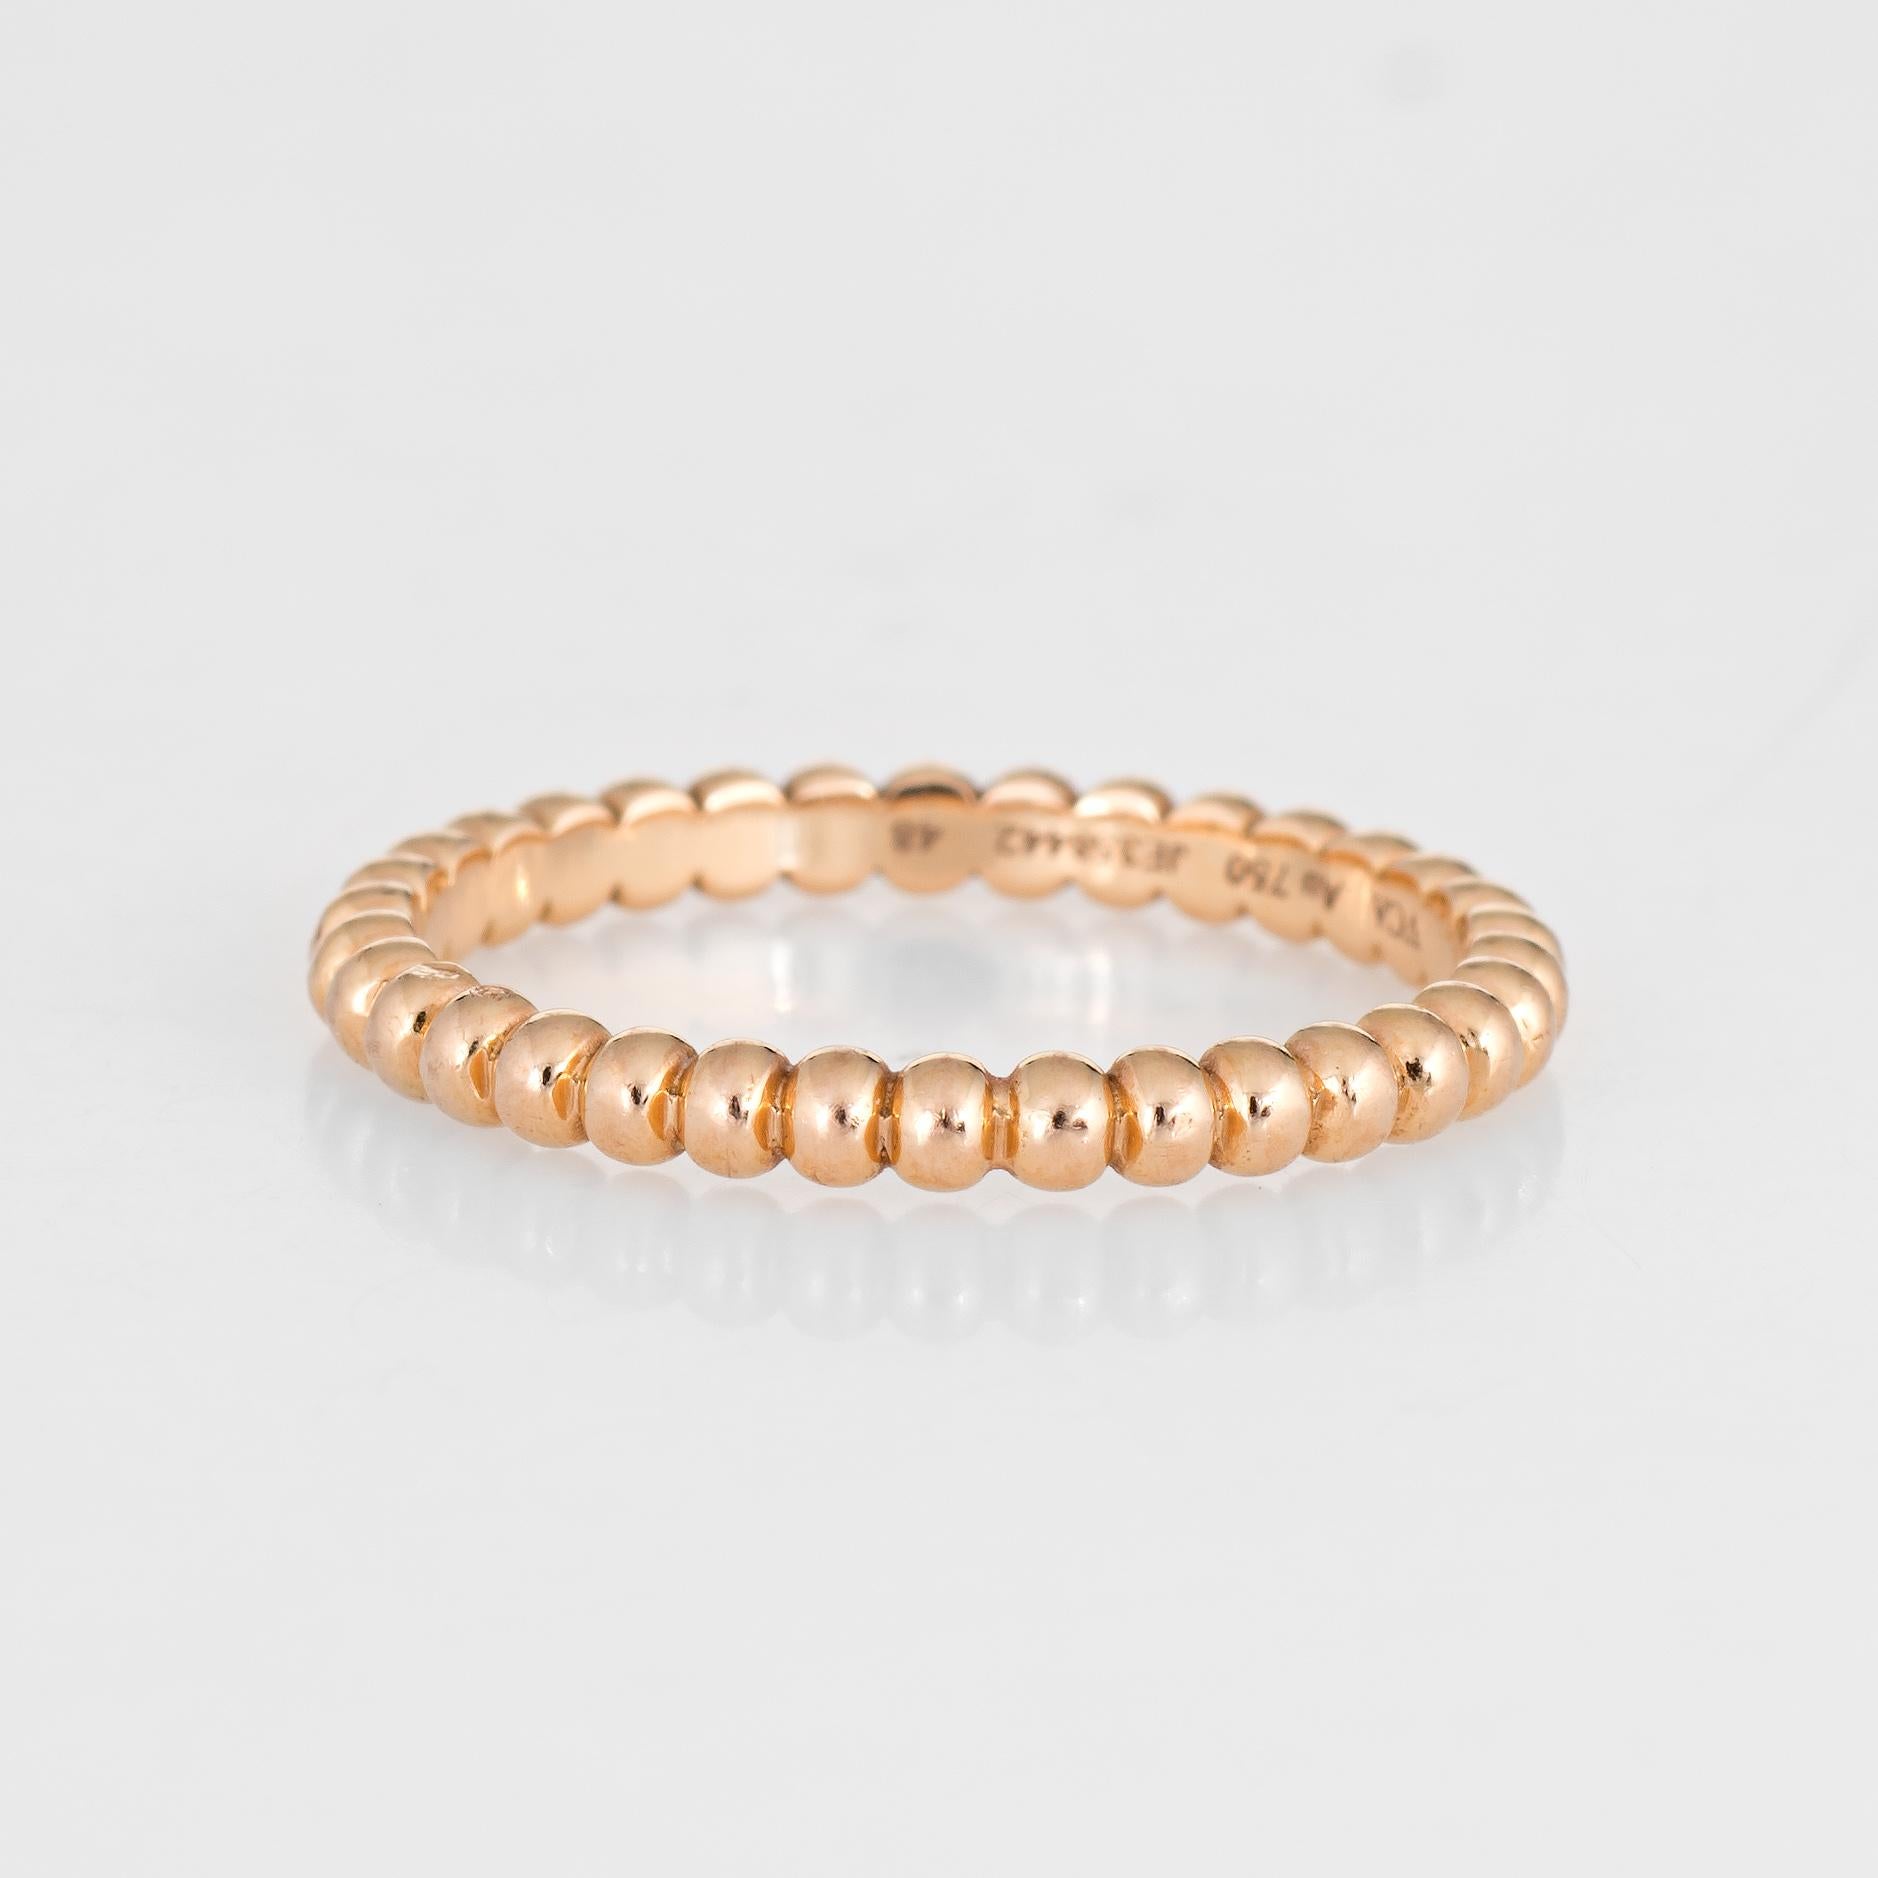 Finely detailed Van Cleef & Arpels estate ring from the Perlee collection crafted in 18k yellow gold. 

The stylish ring features gold pearls in a single line around the entire band. Great worn alone or stacked with your fine jewelry from any